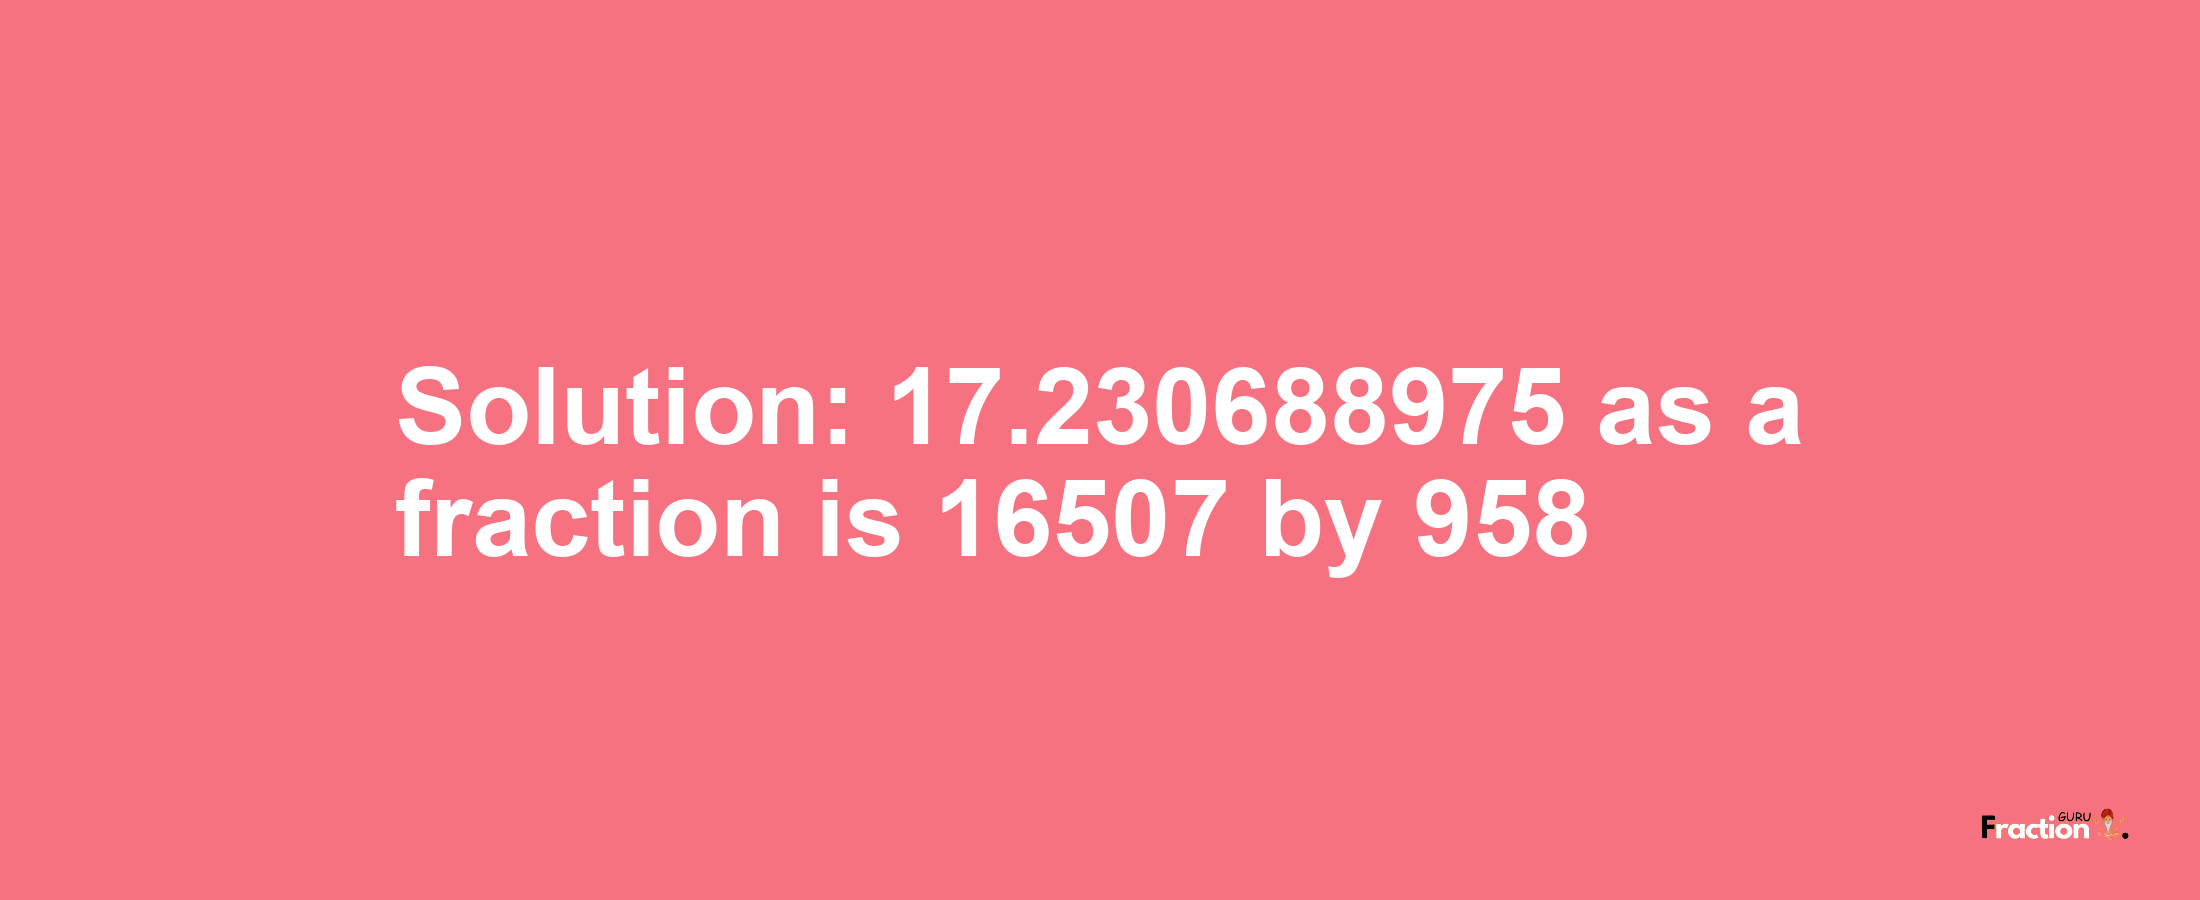 Solution:17.230688975 as a fraction is 16507/958